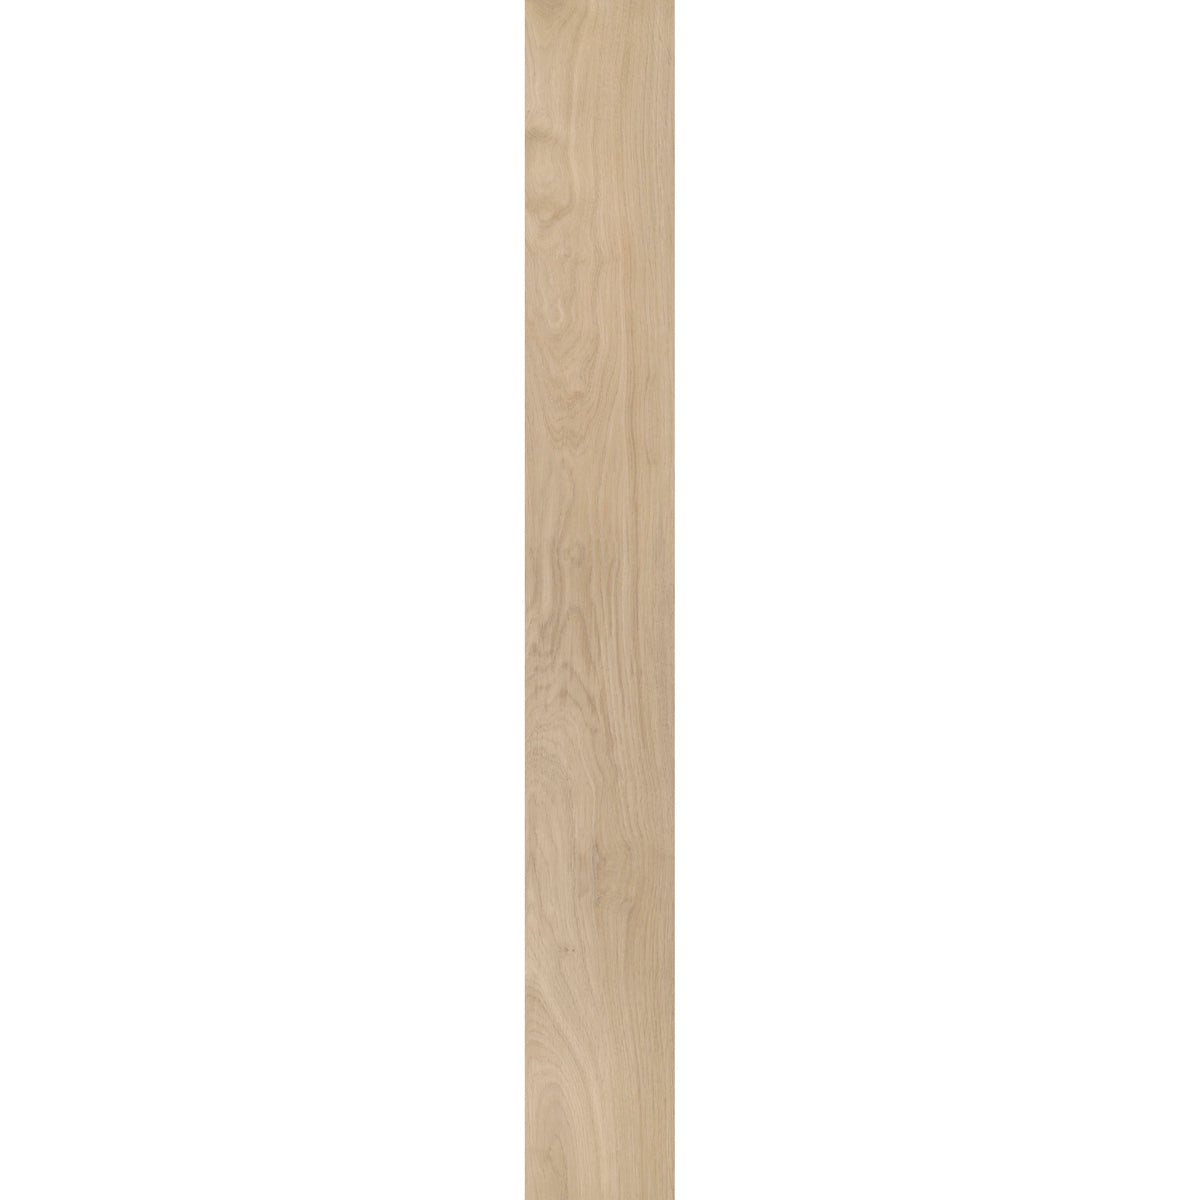  Shaw Contract - Branching Out 5mm - 6 in. x 48 in. Luxury Vinyl - Plains Oak